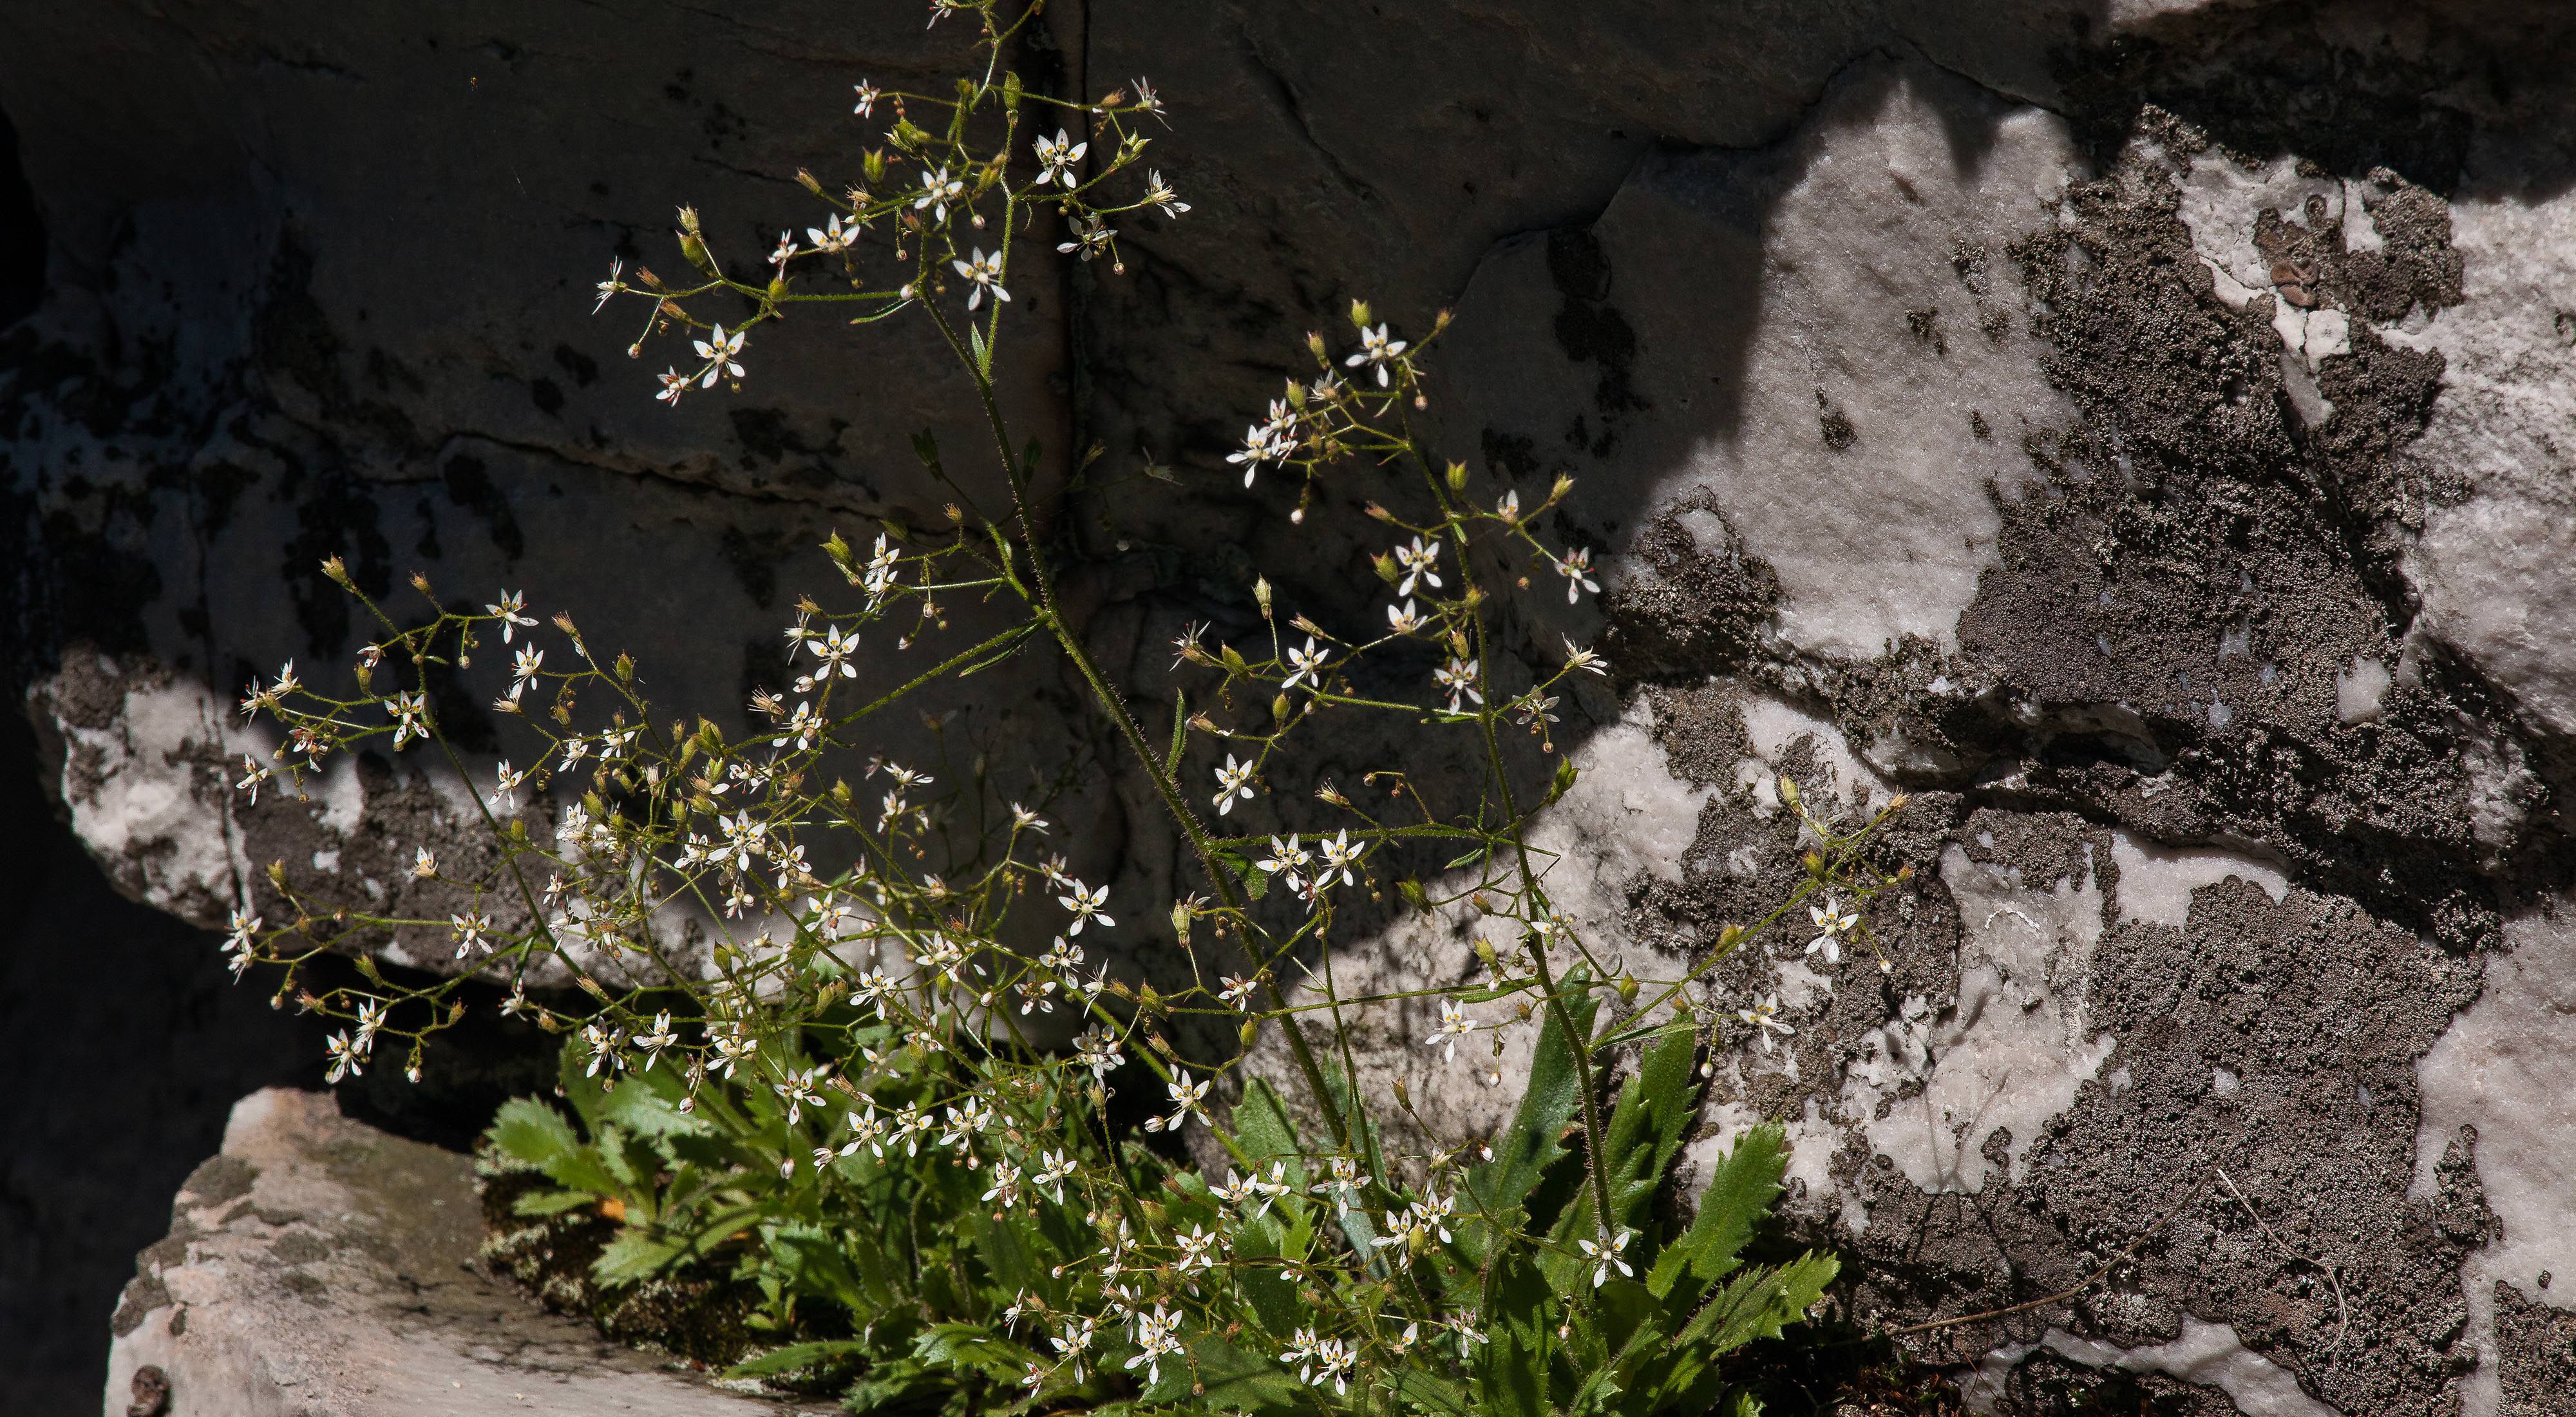 A bushy clump of vegetation with small white flowers grows out of the cleft in a rock face.